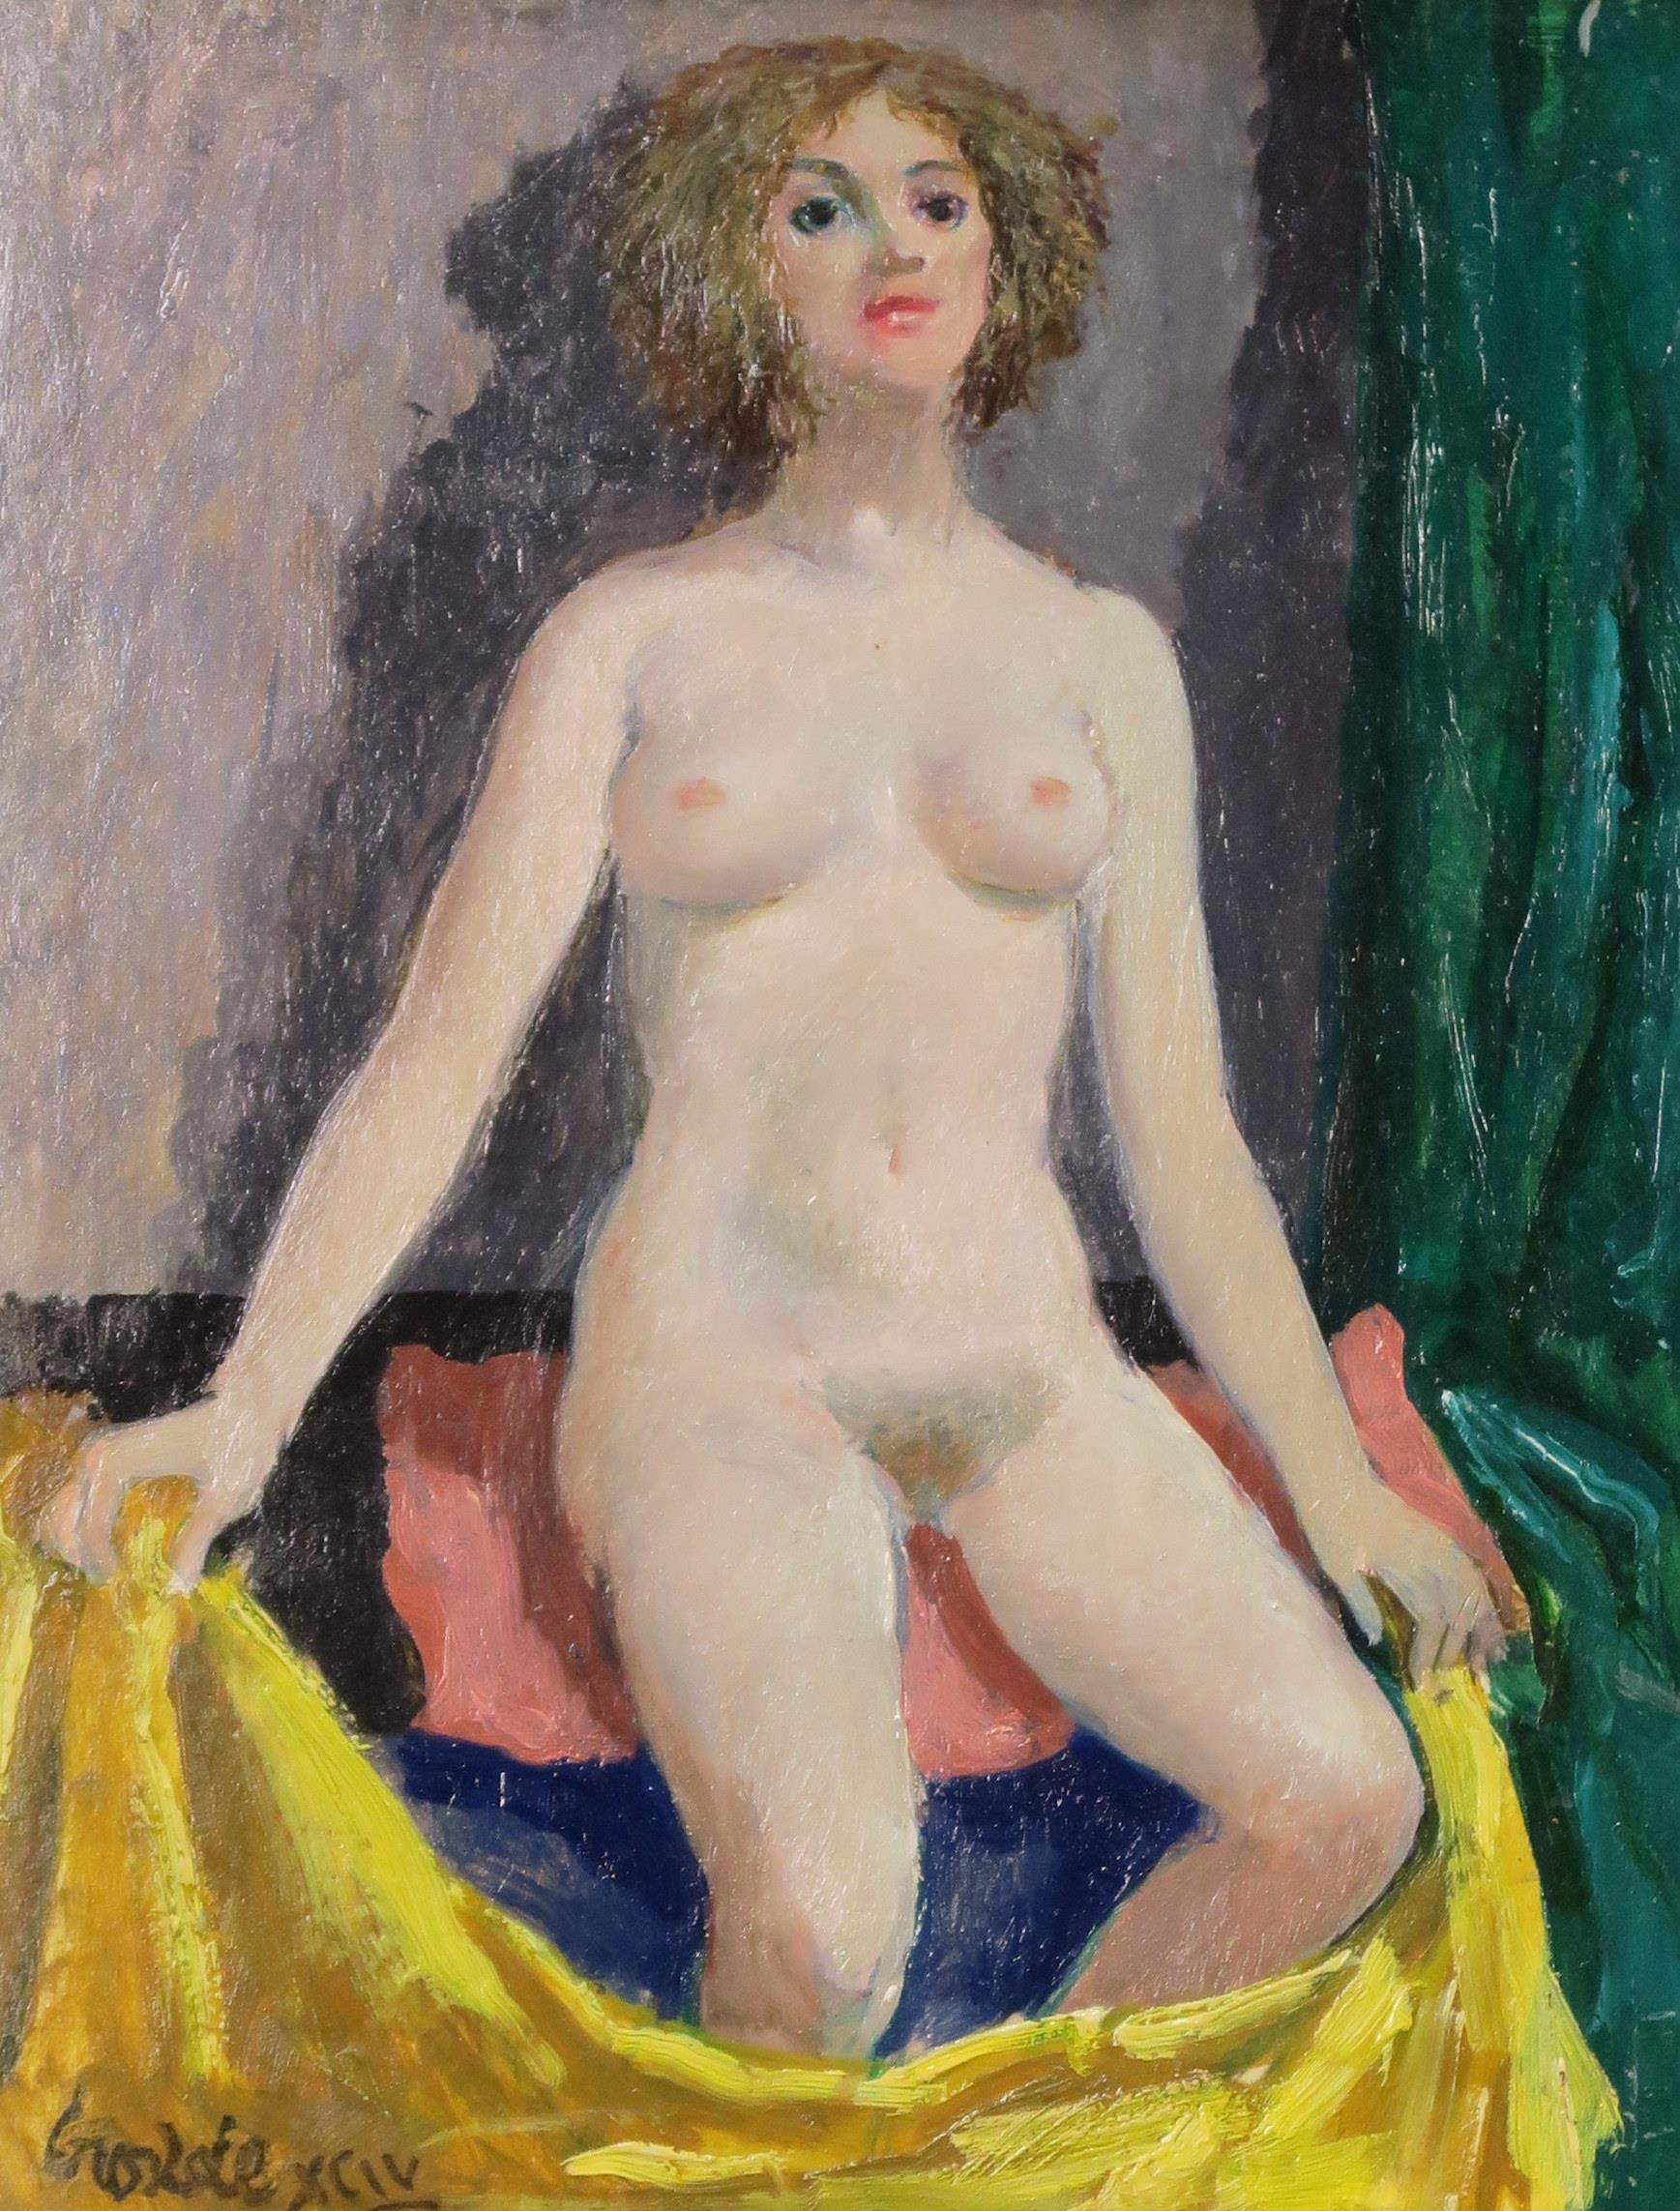 WILLIAM CROSBIE RSA RGI (1915-1999) WOMAN SEATED ON PINK PILLOW  Oil on board, signed lower left, 24